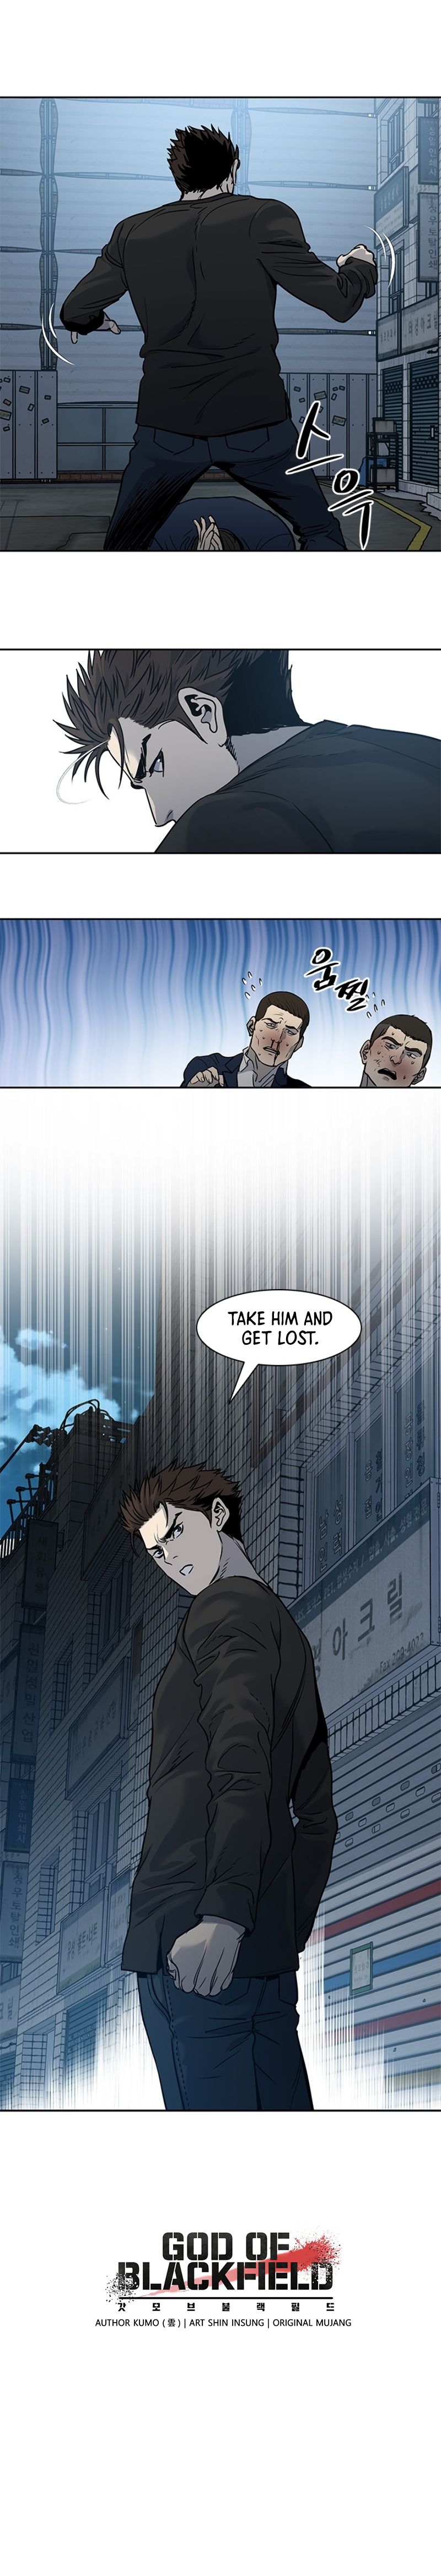 God of Blackfield - Chapter 46 Page 26